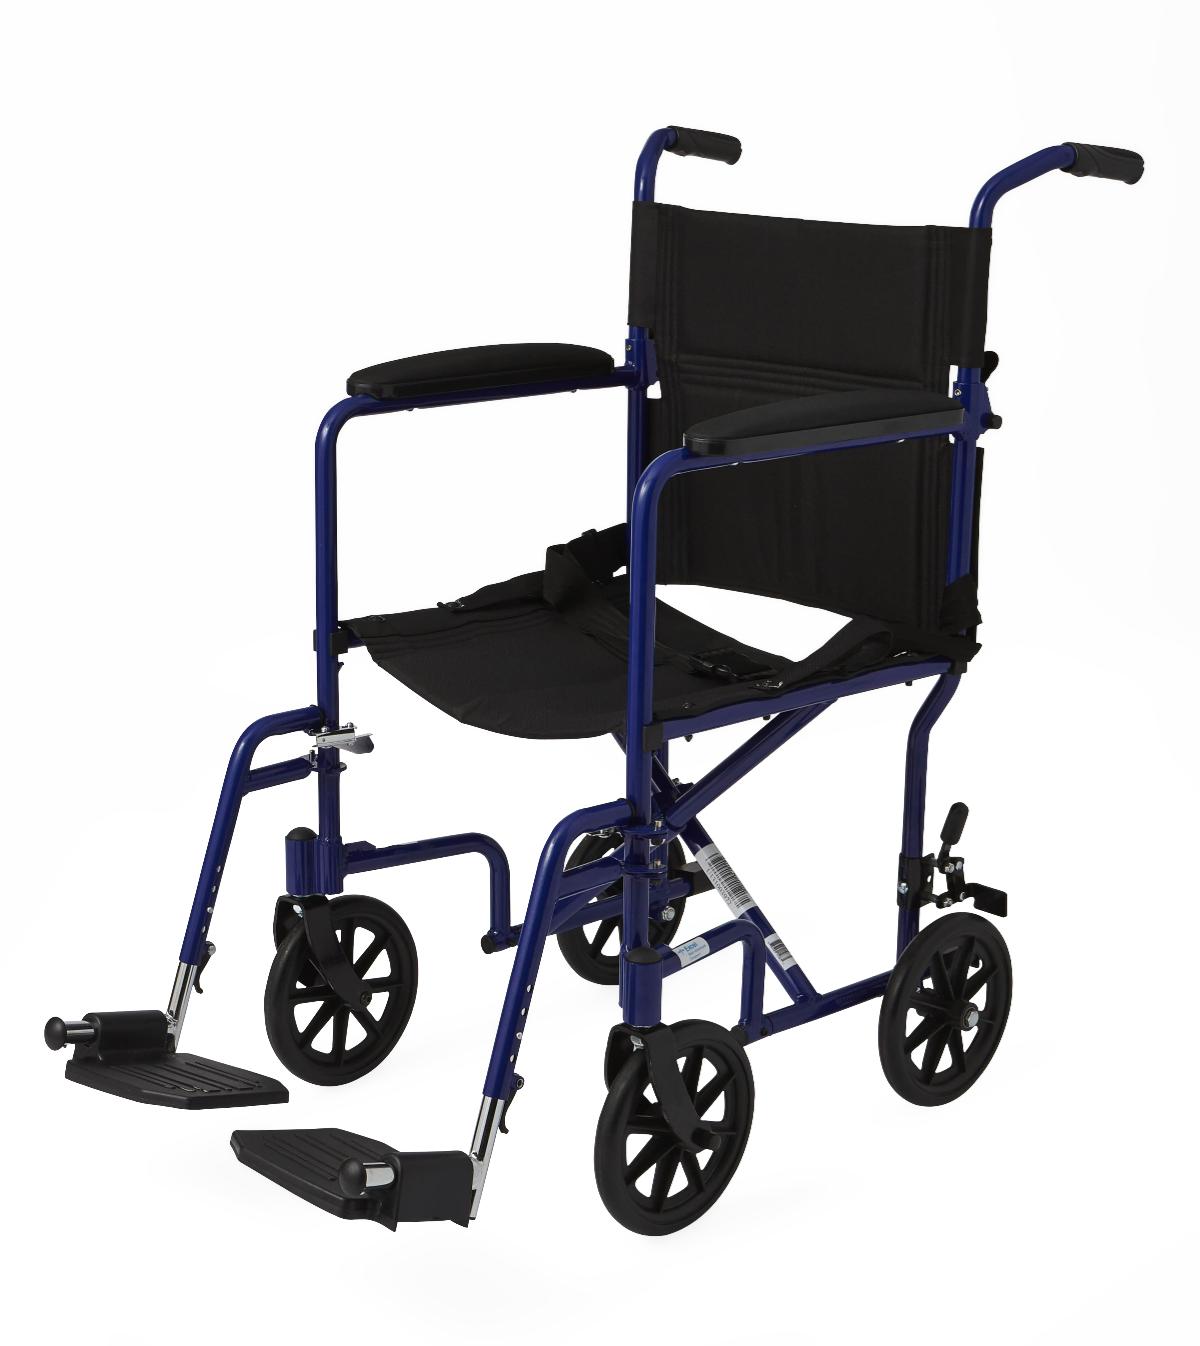 Rental Transport Chair with 8" Wheels